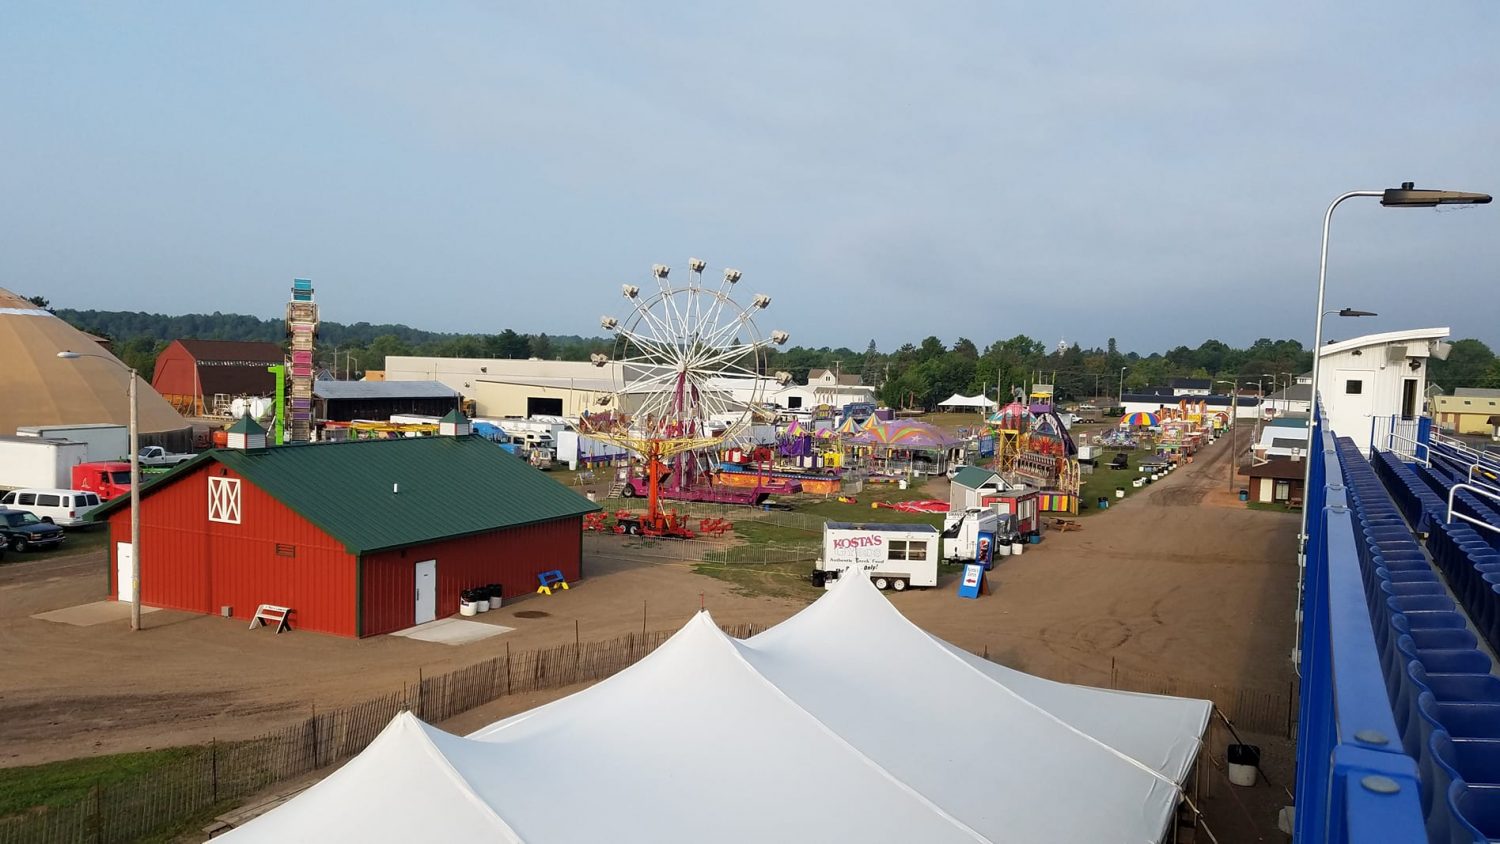 A preview of this week’s 130th Annual Lincoln County Fair